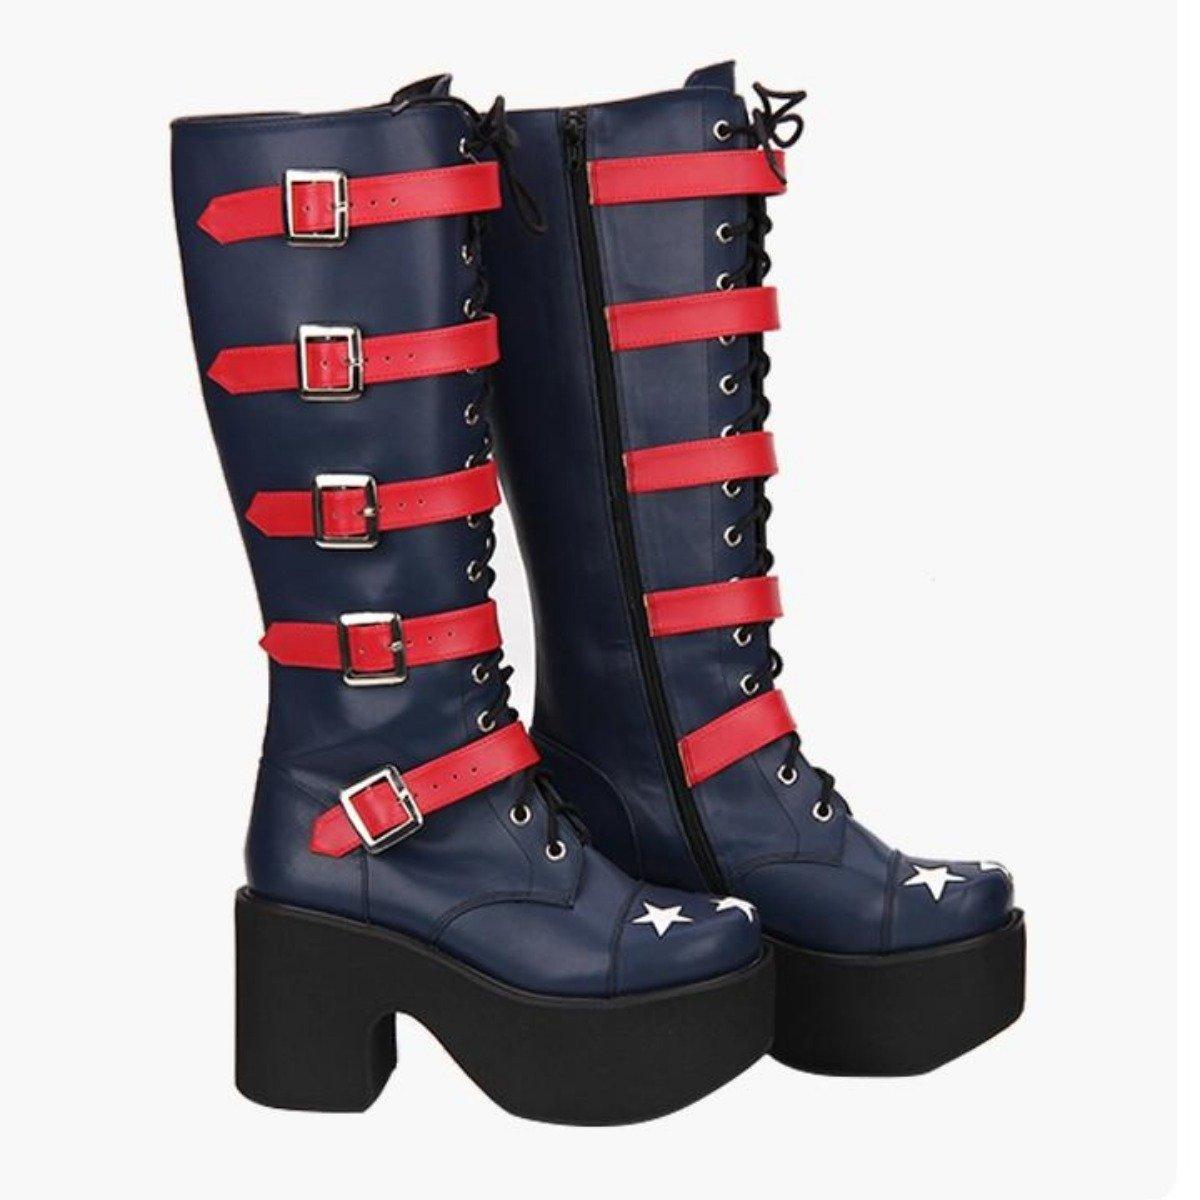 Women's High Heel Buckle Straps Boots with Stars - American Legend Rider